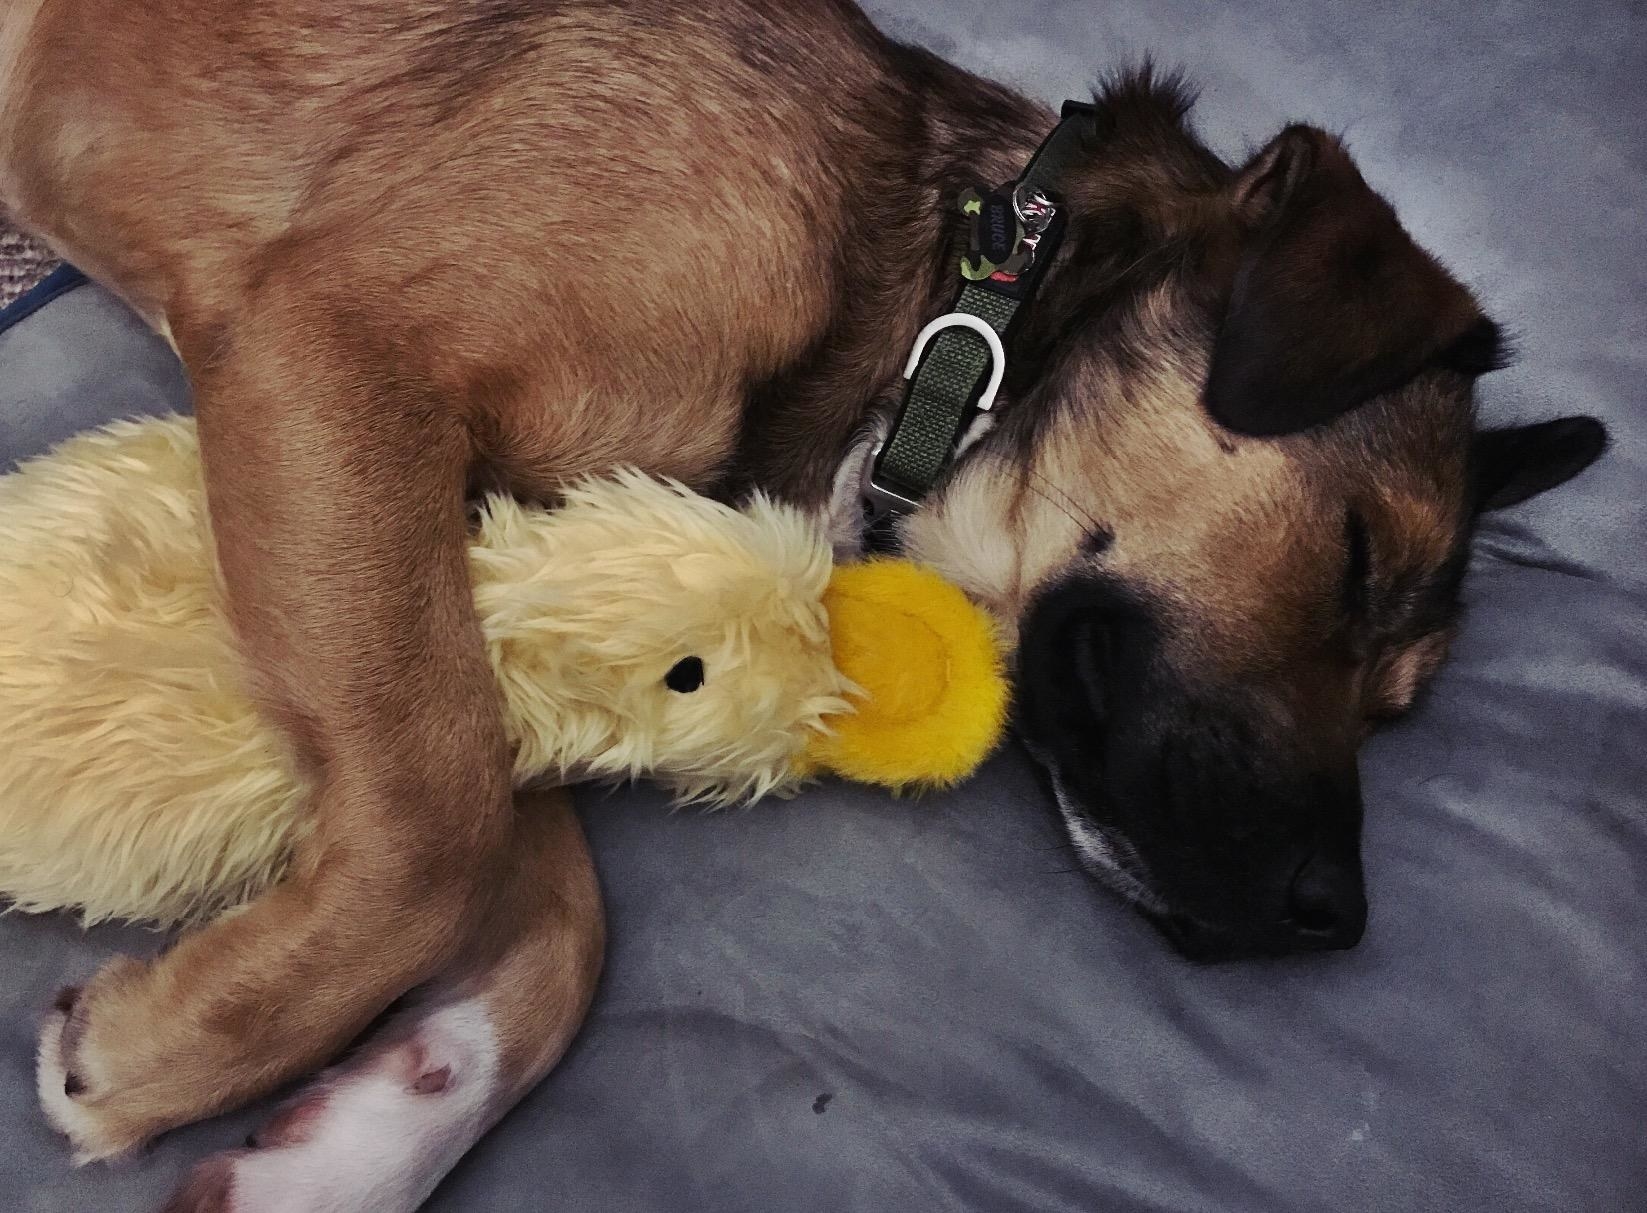 Review photo of dog enjoying the yellow duckworth toy